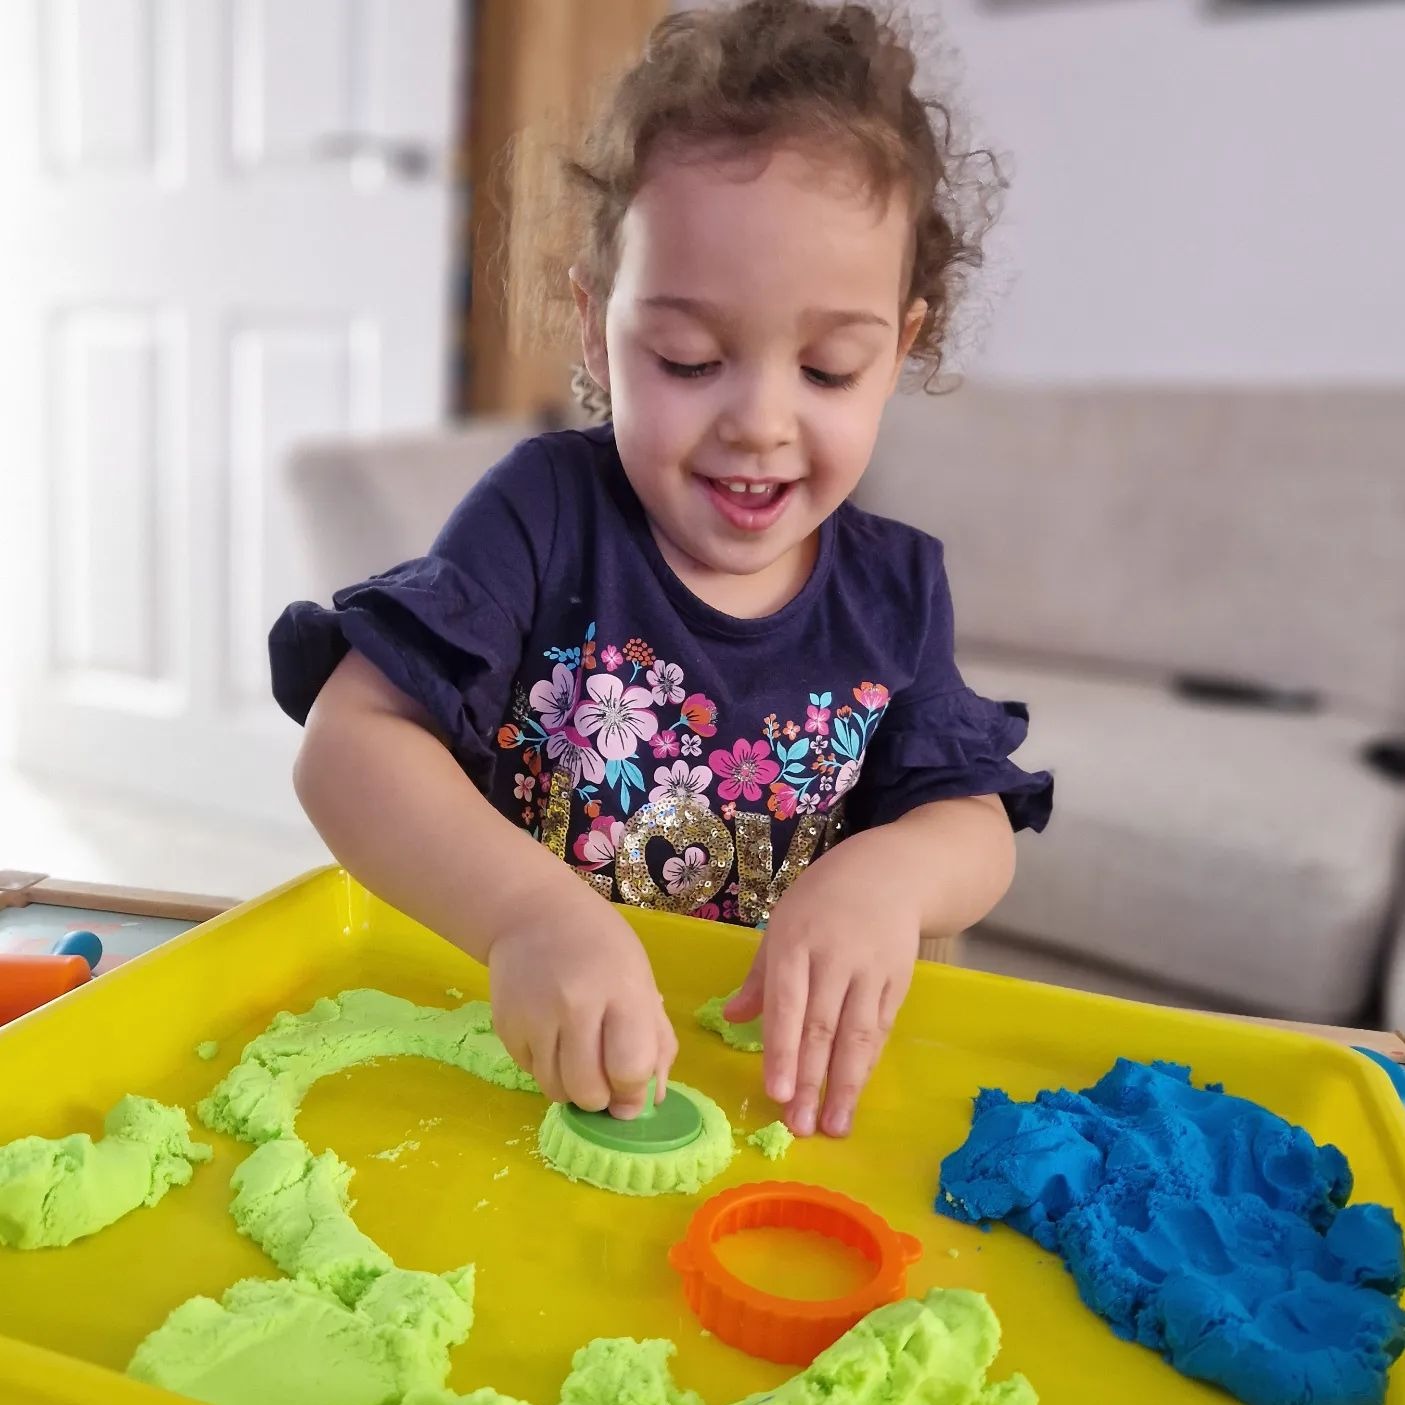 Playfoam Sand 8-Pack- Playfoam Sand 8-Pack,Messy play sand special needs,special needs tactile games ideas,special needs sensory games and ideas,Indulge in the soft, sculpting shaping fun of Playfoam® Sand! This tactile play sand offers a unique sensory experience, allowing children to sculpt, squish, mould, sift, and scoop like never before. Whether in the classroom or at home, Playfoam Sand provides endless opportunities for sensory exploration and fine motor skill development. Playfoam Sand 8-Pack Descri